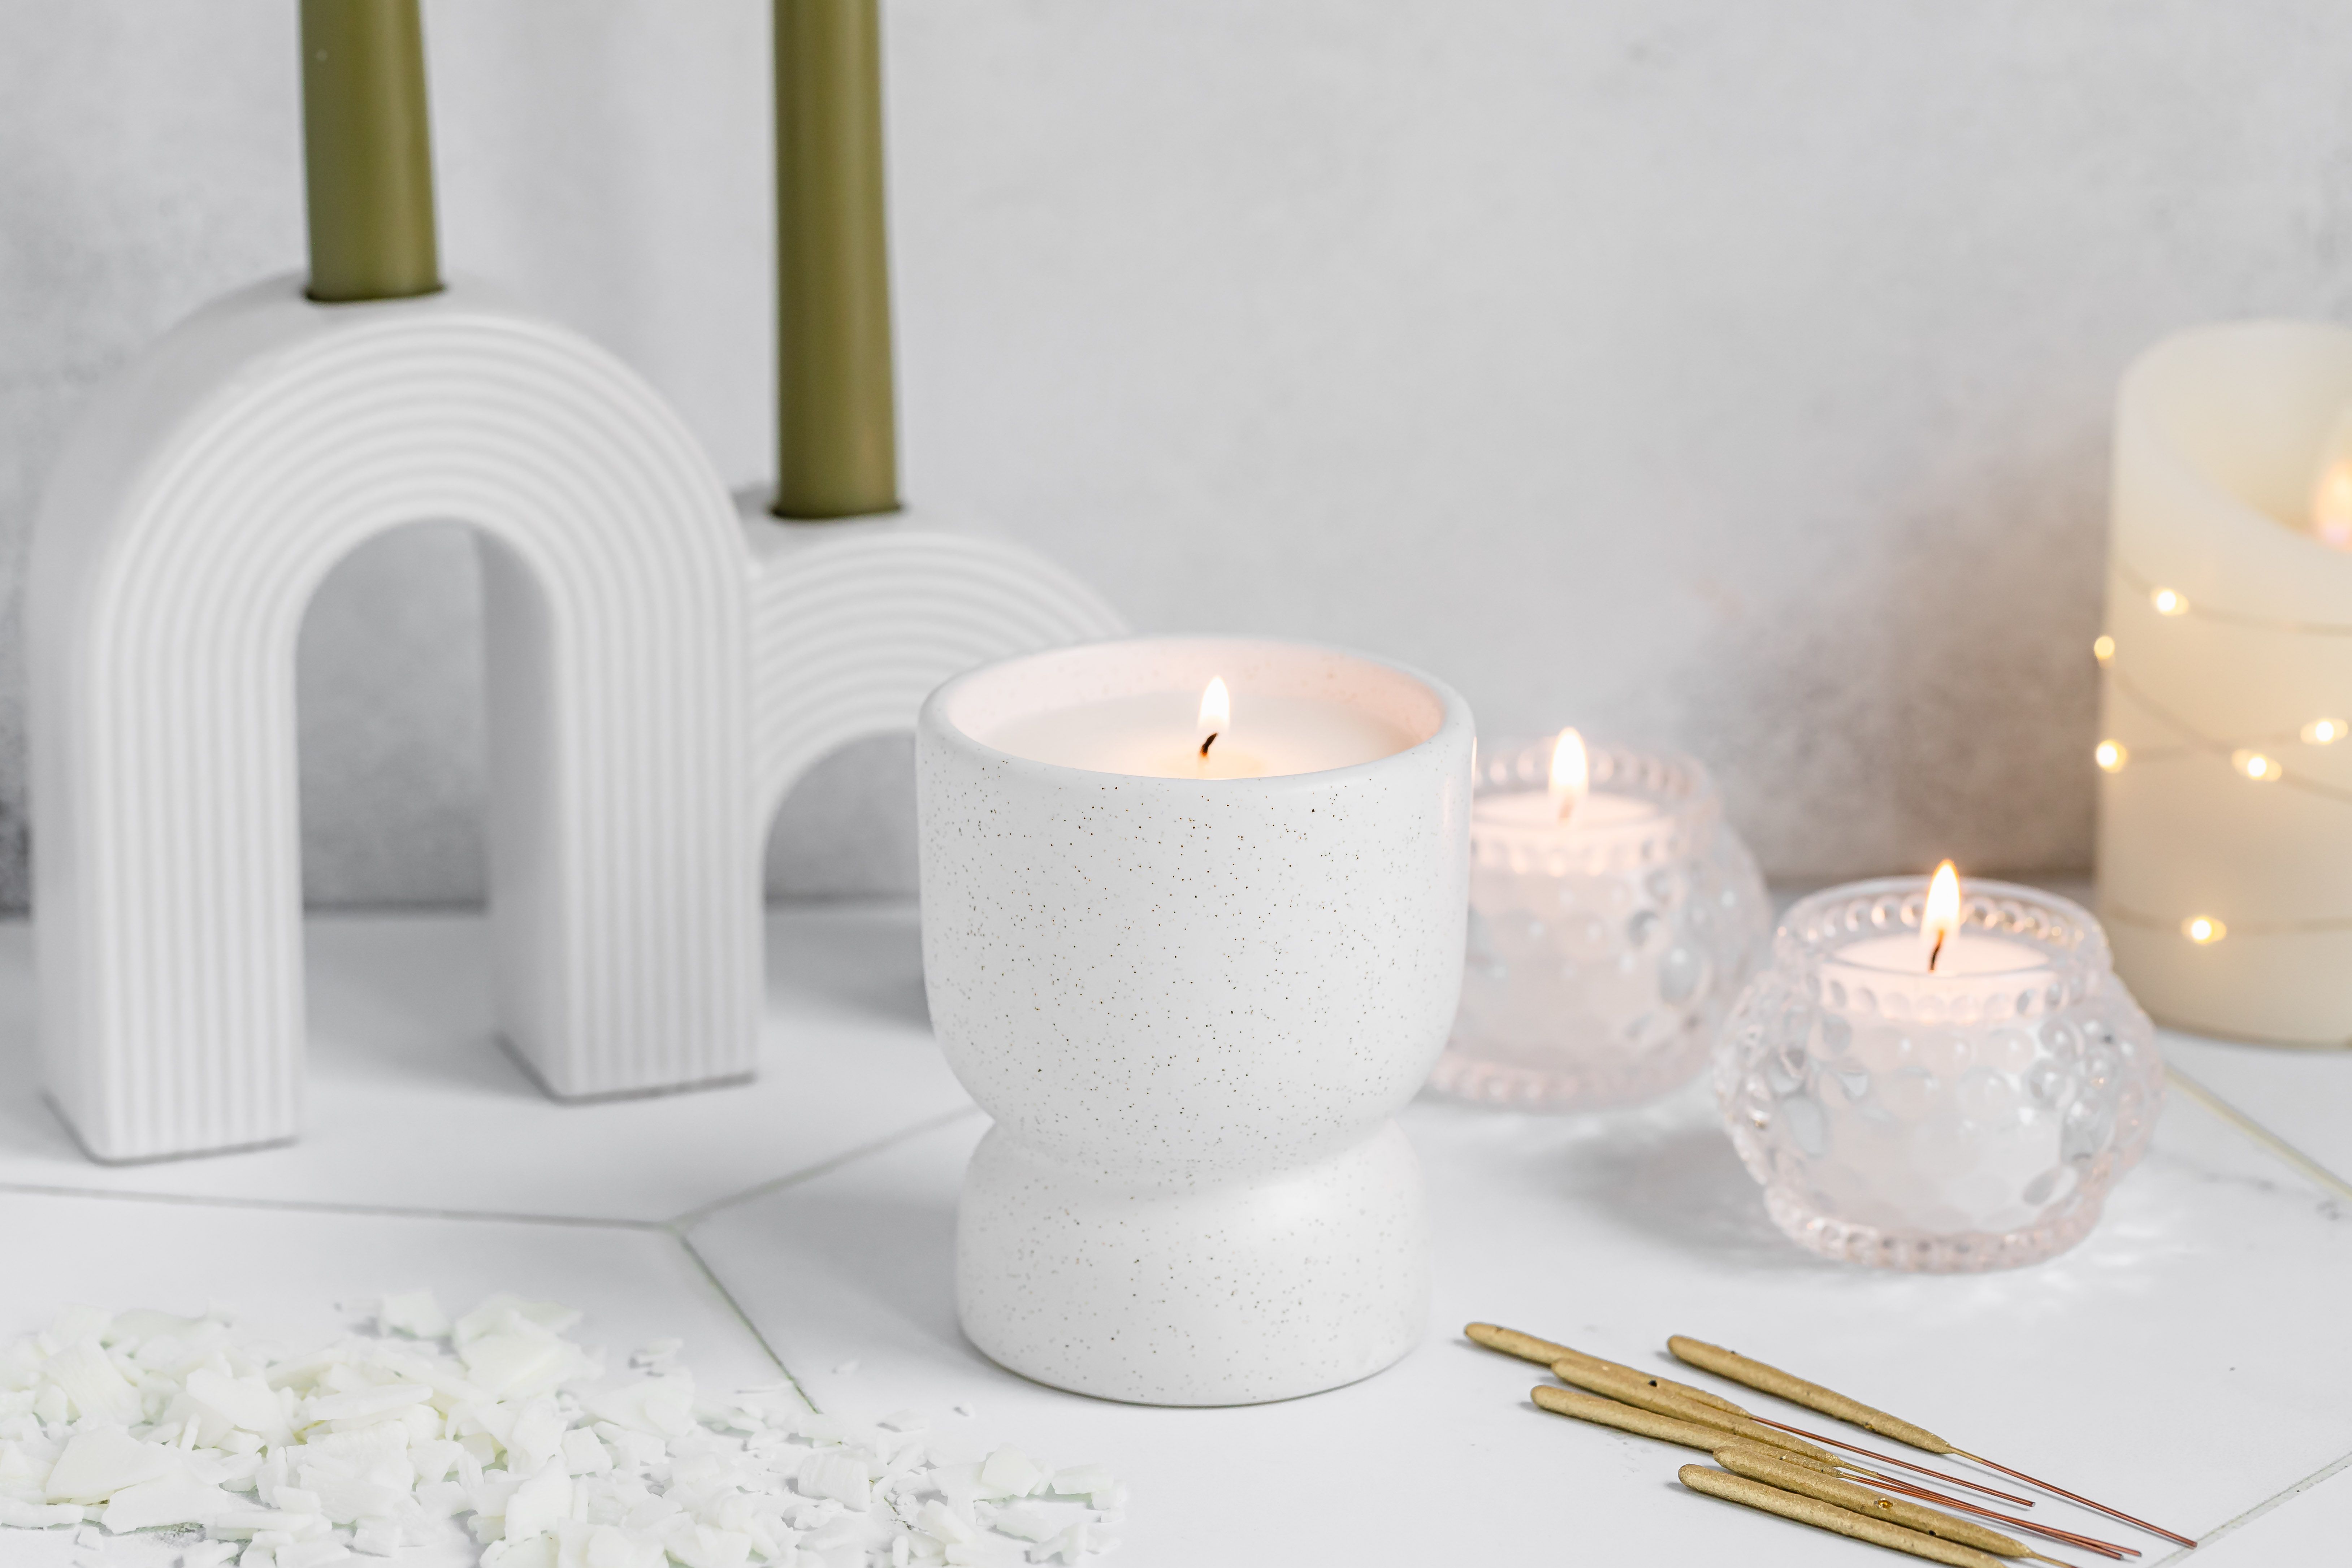 21 Types of Candles Everyone Should Know